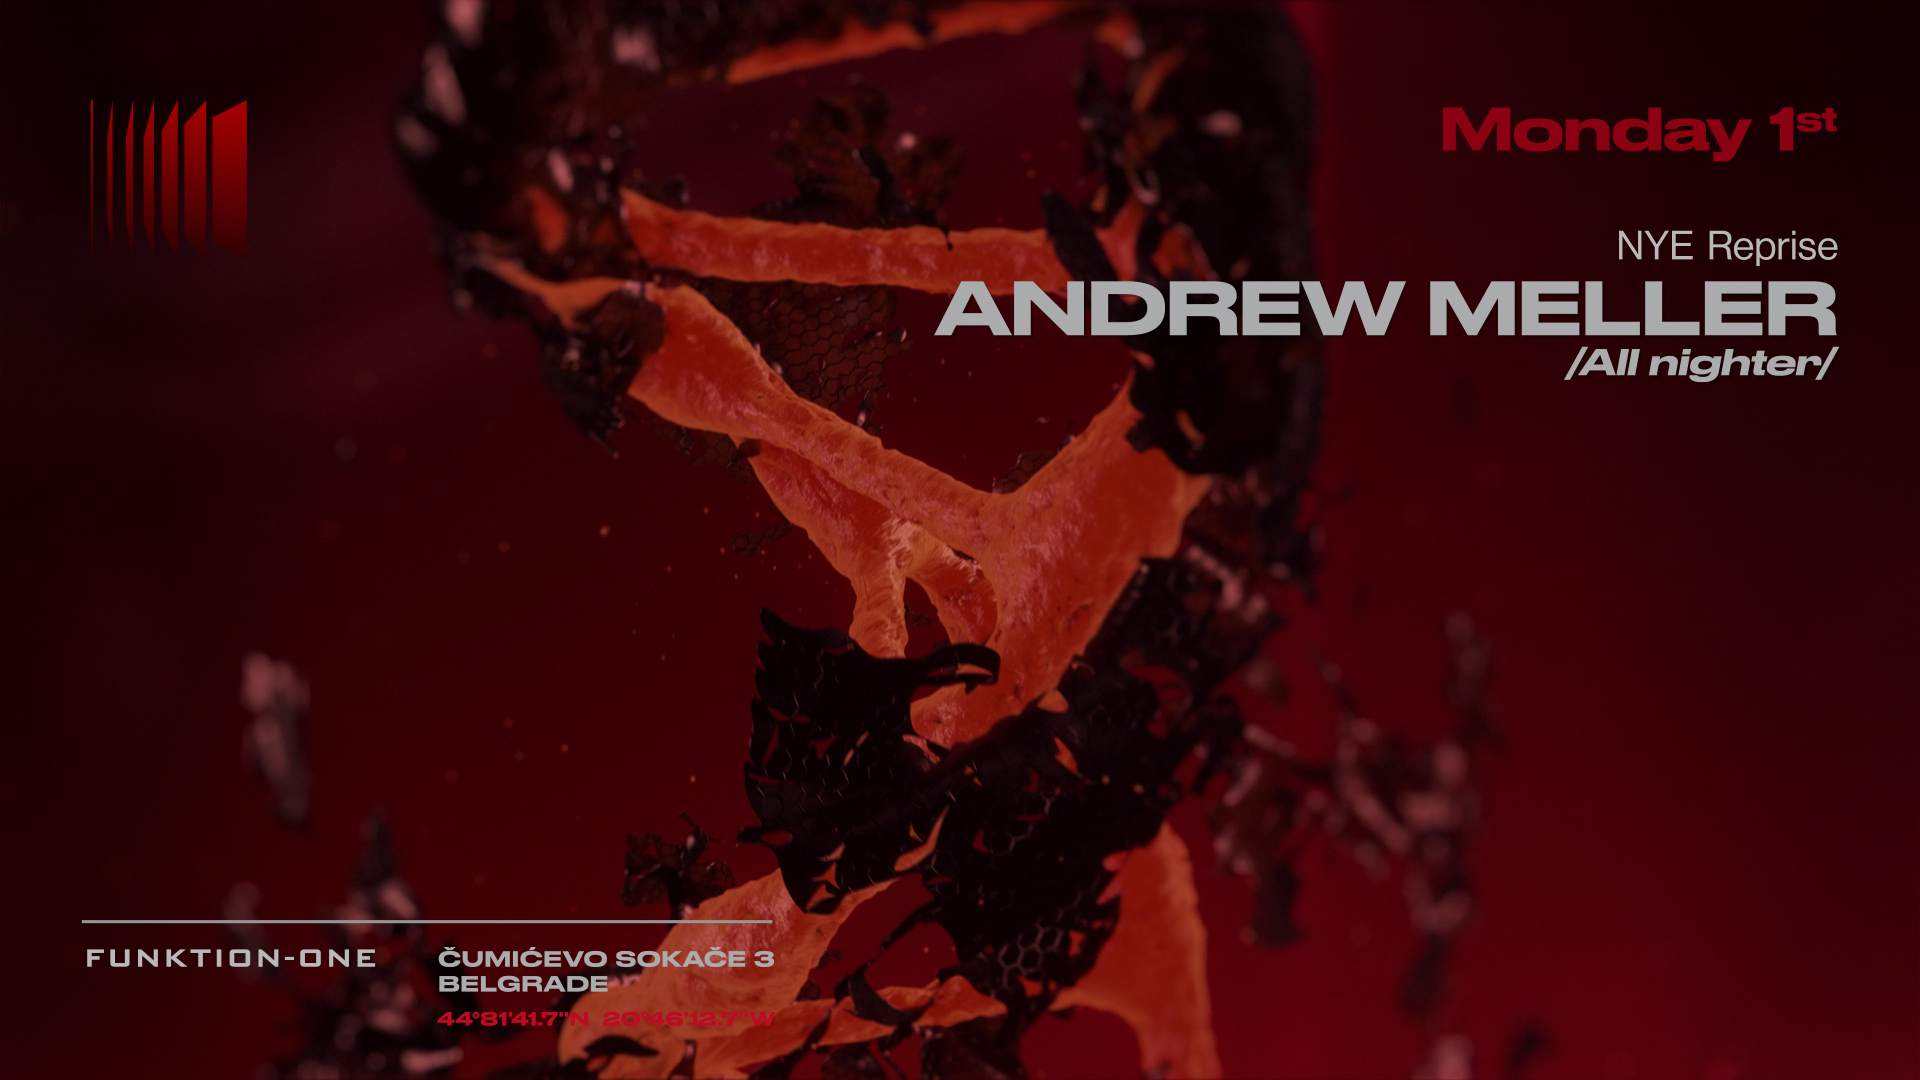 NYE reprise with Andrew Meller (all nighter) - フライヤー表